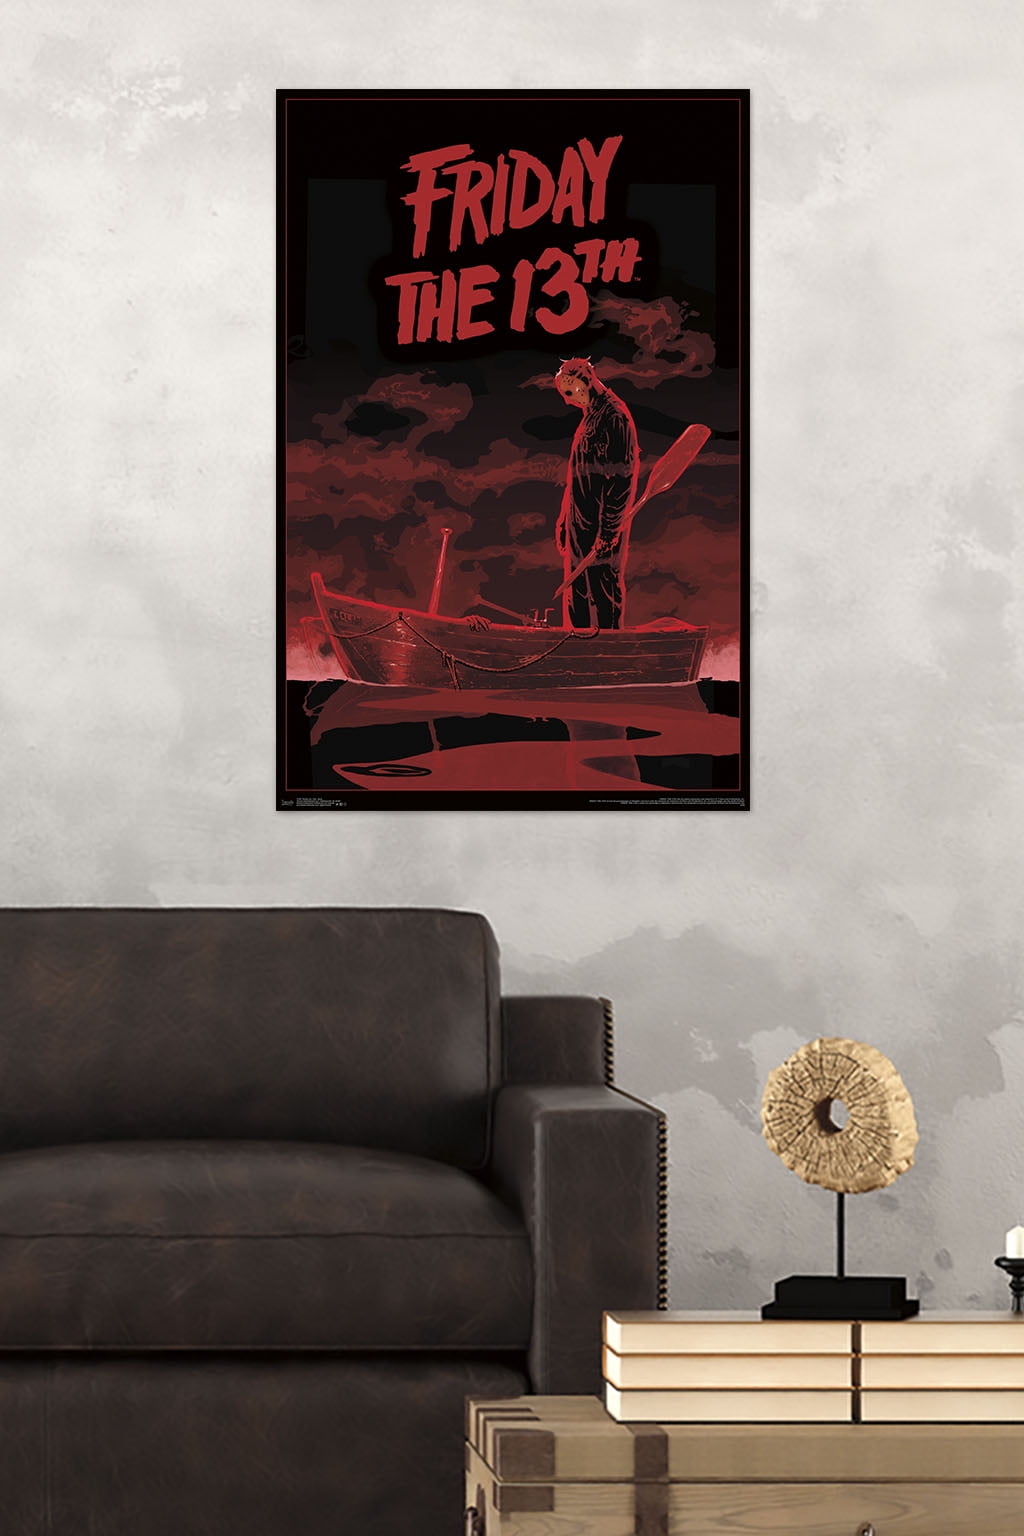 Friday The 13th - Boat Poster - 22.375' x 34' 